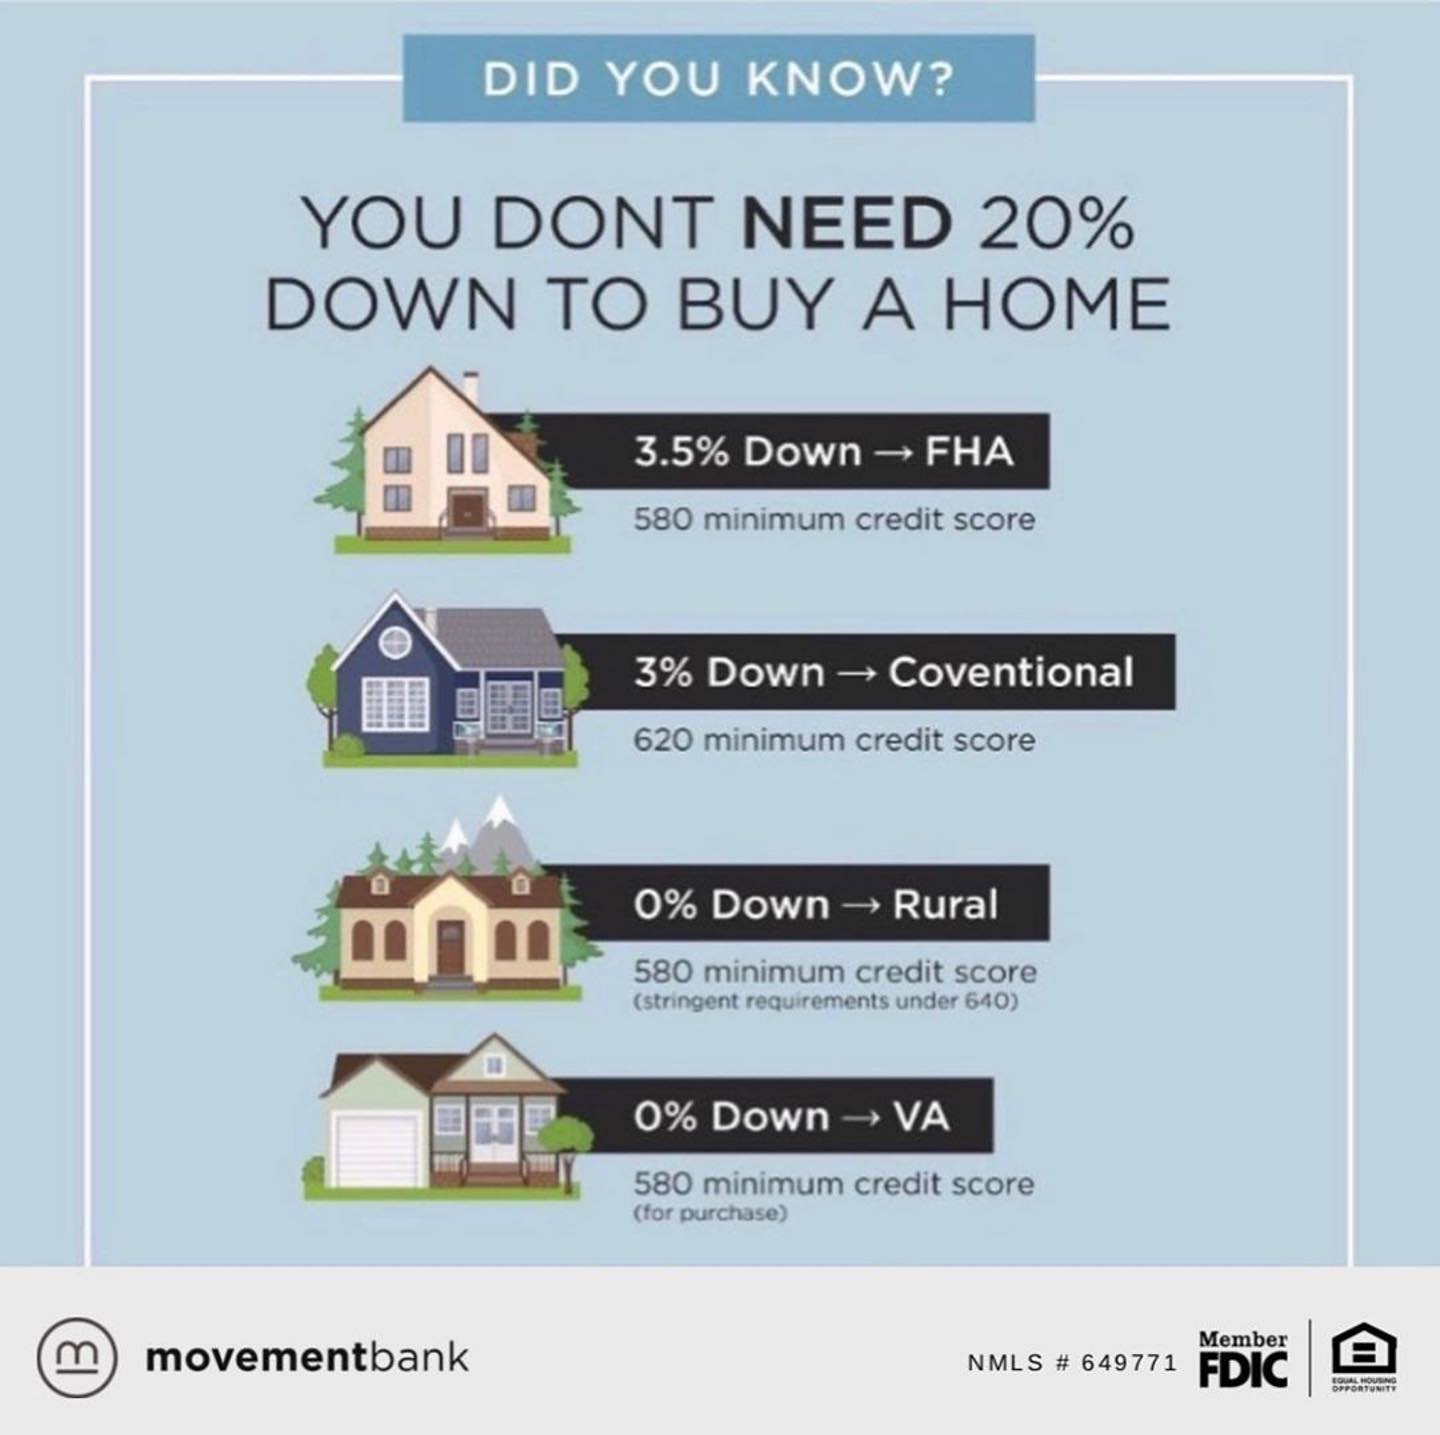 do you have to have 20 down to buy a home